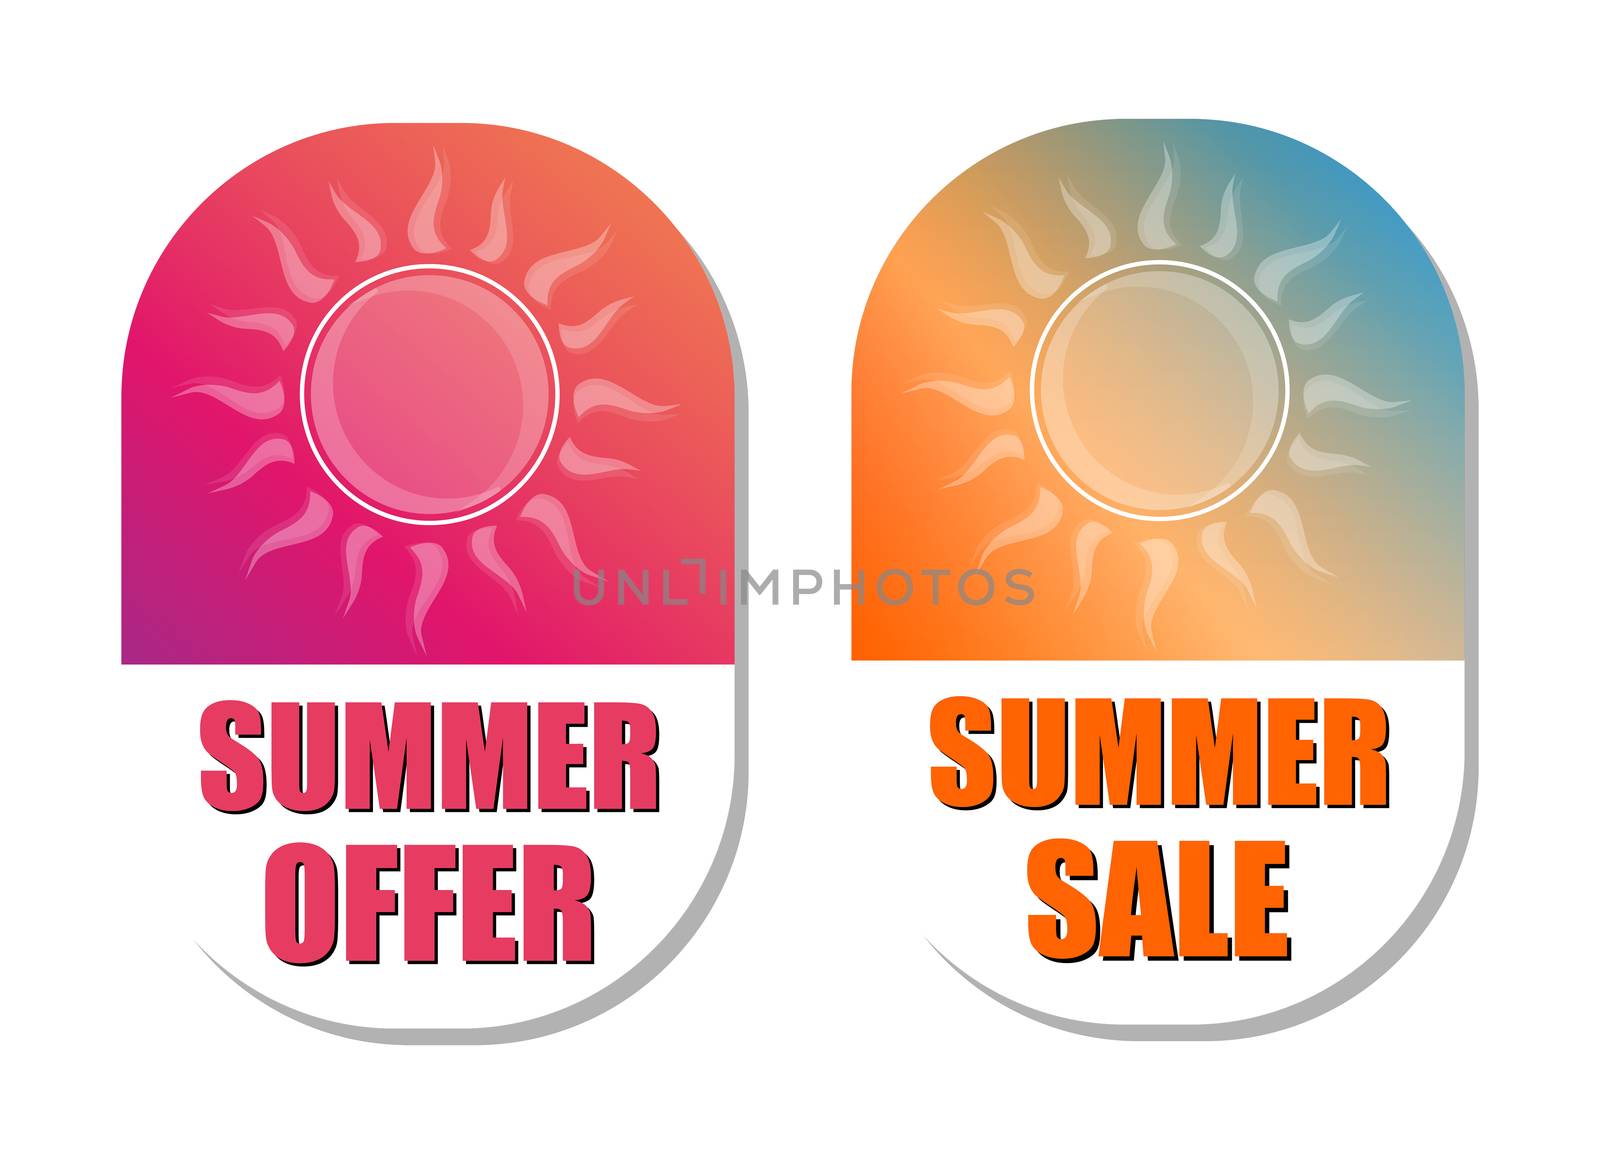 summer offer and sale with sun signs, flat design labels by marinini